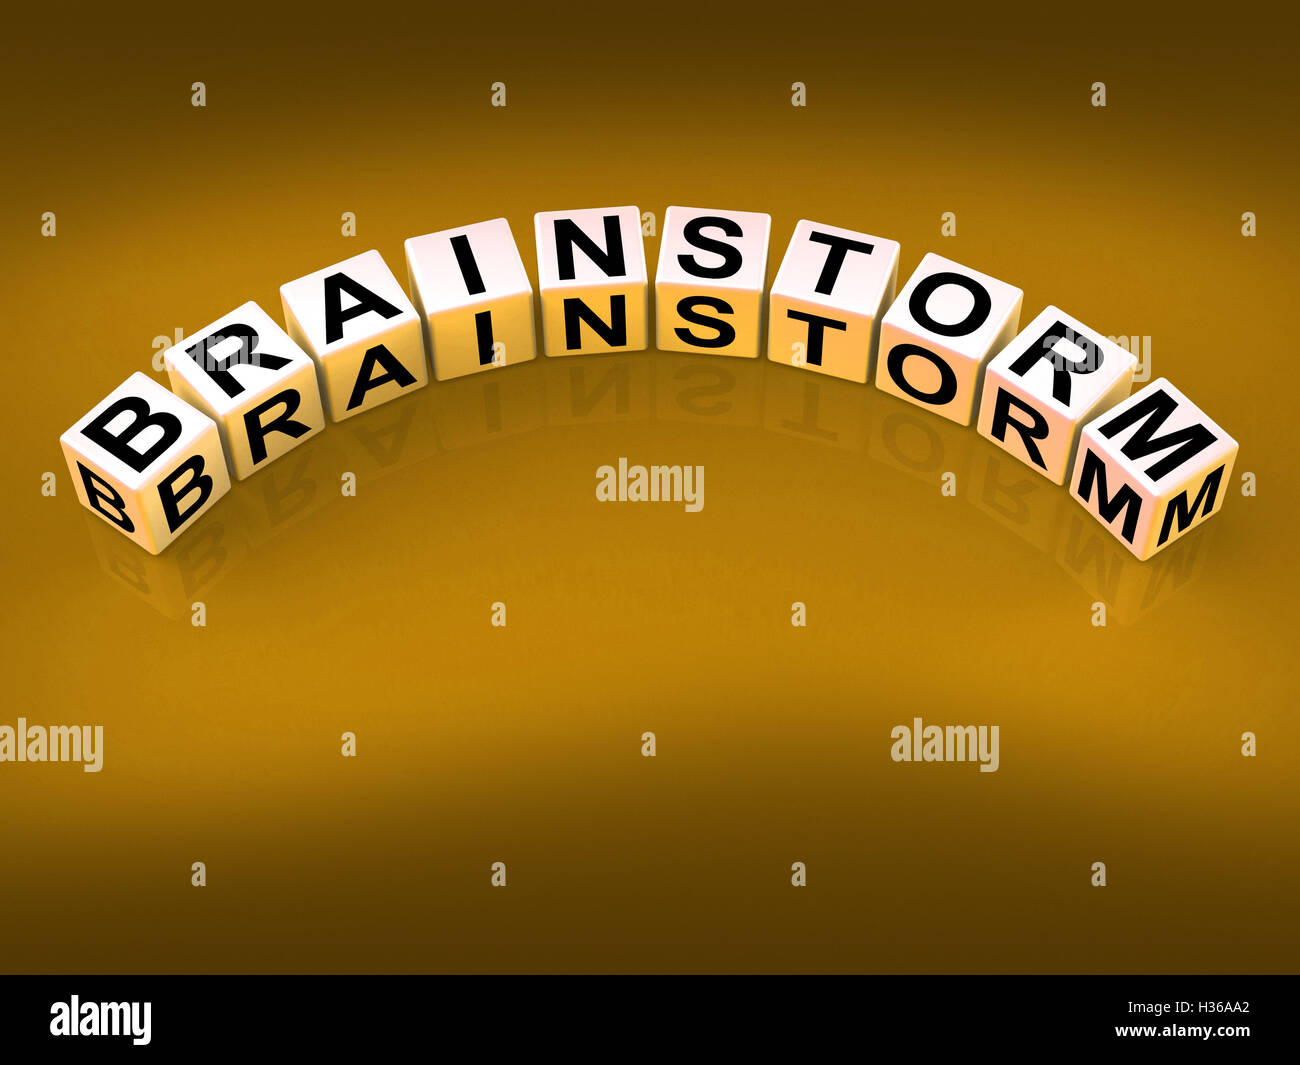 Brainstorm Dice Shows Creative Ideas And Thoughts Stock Photo